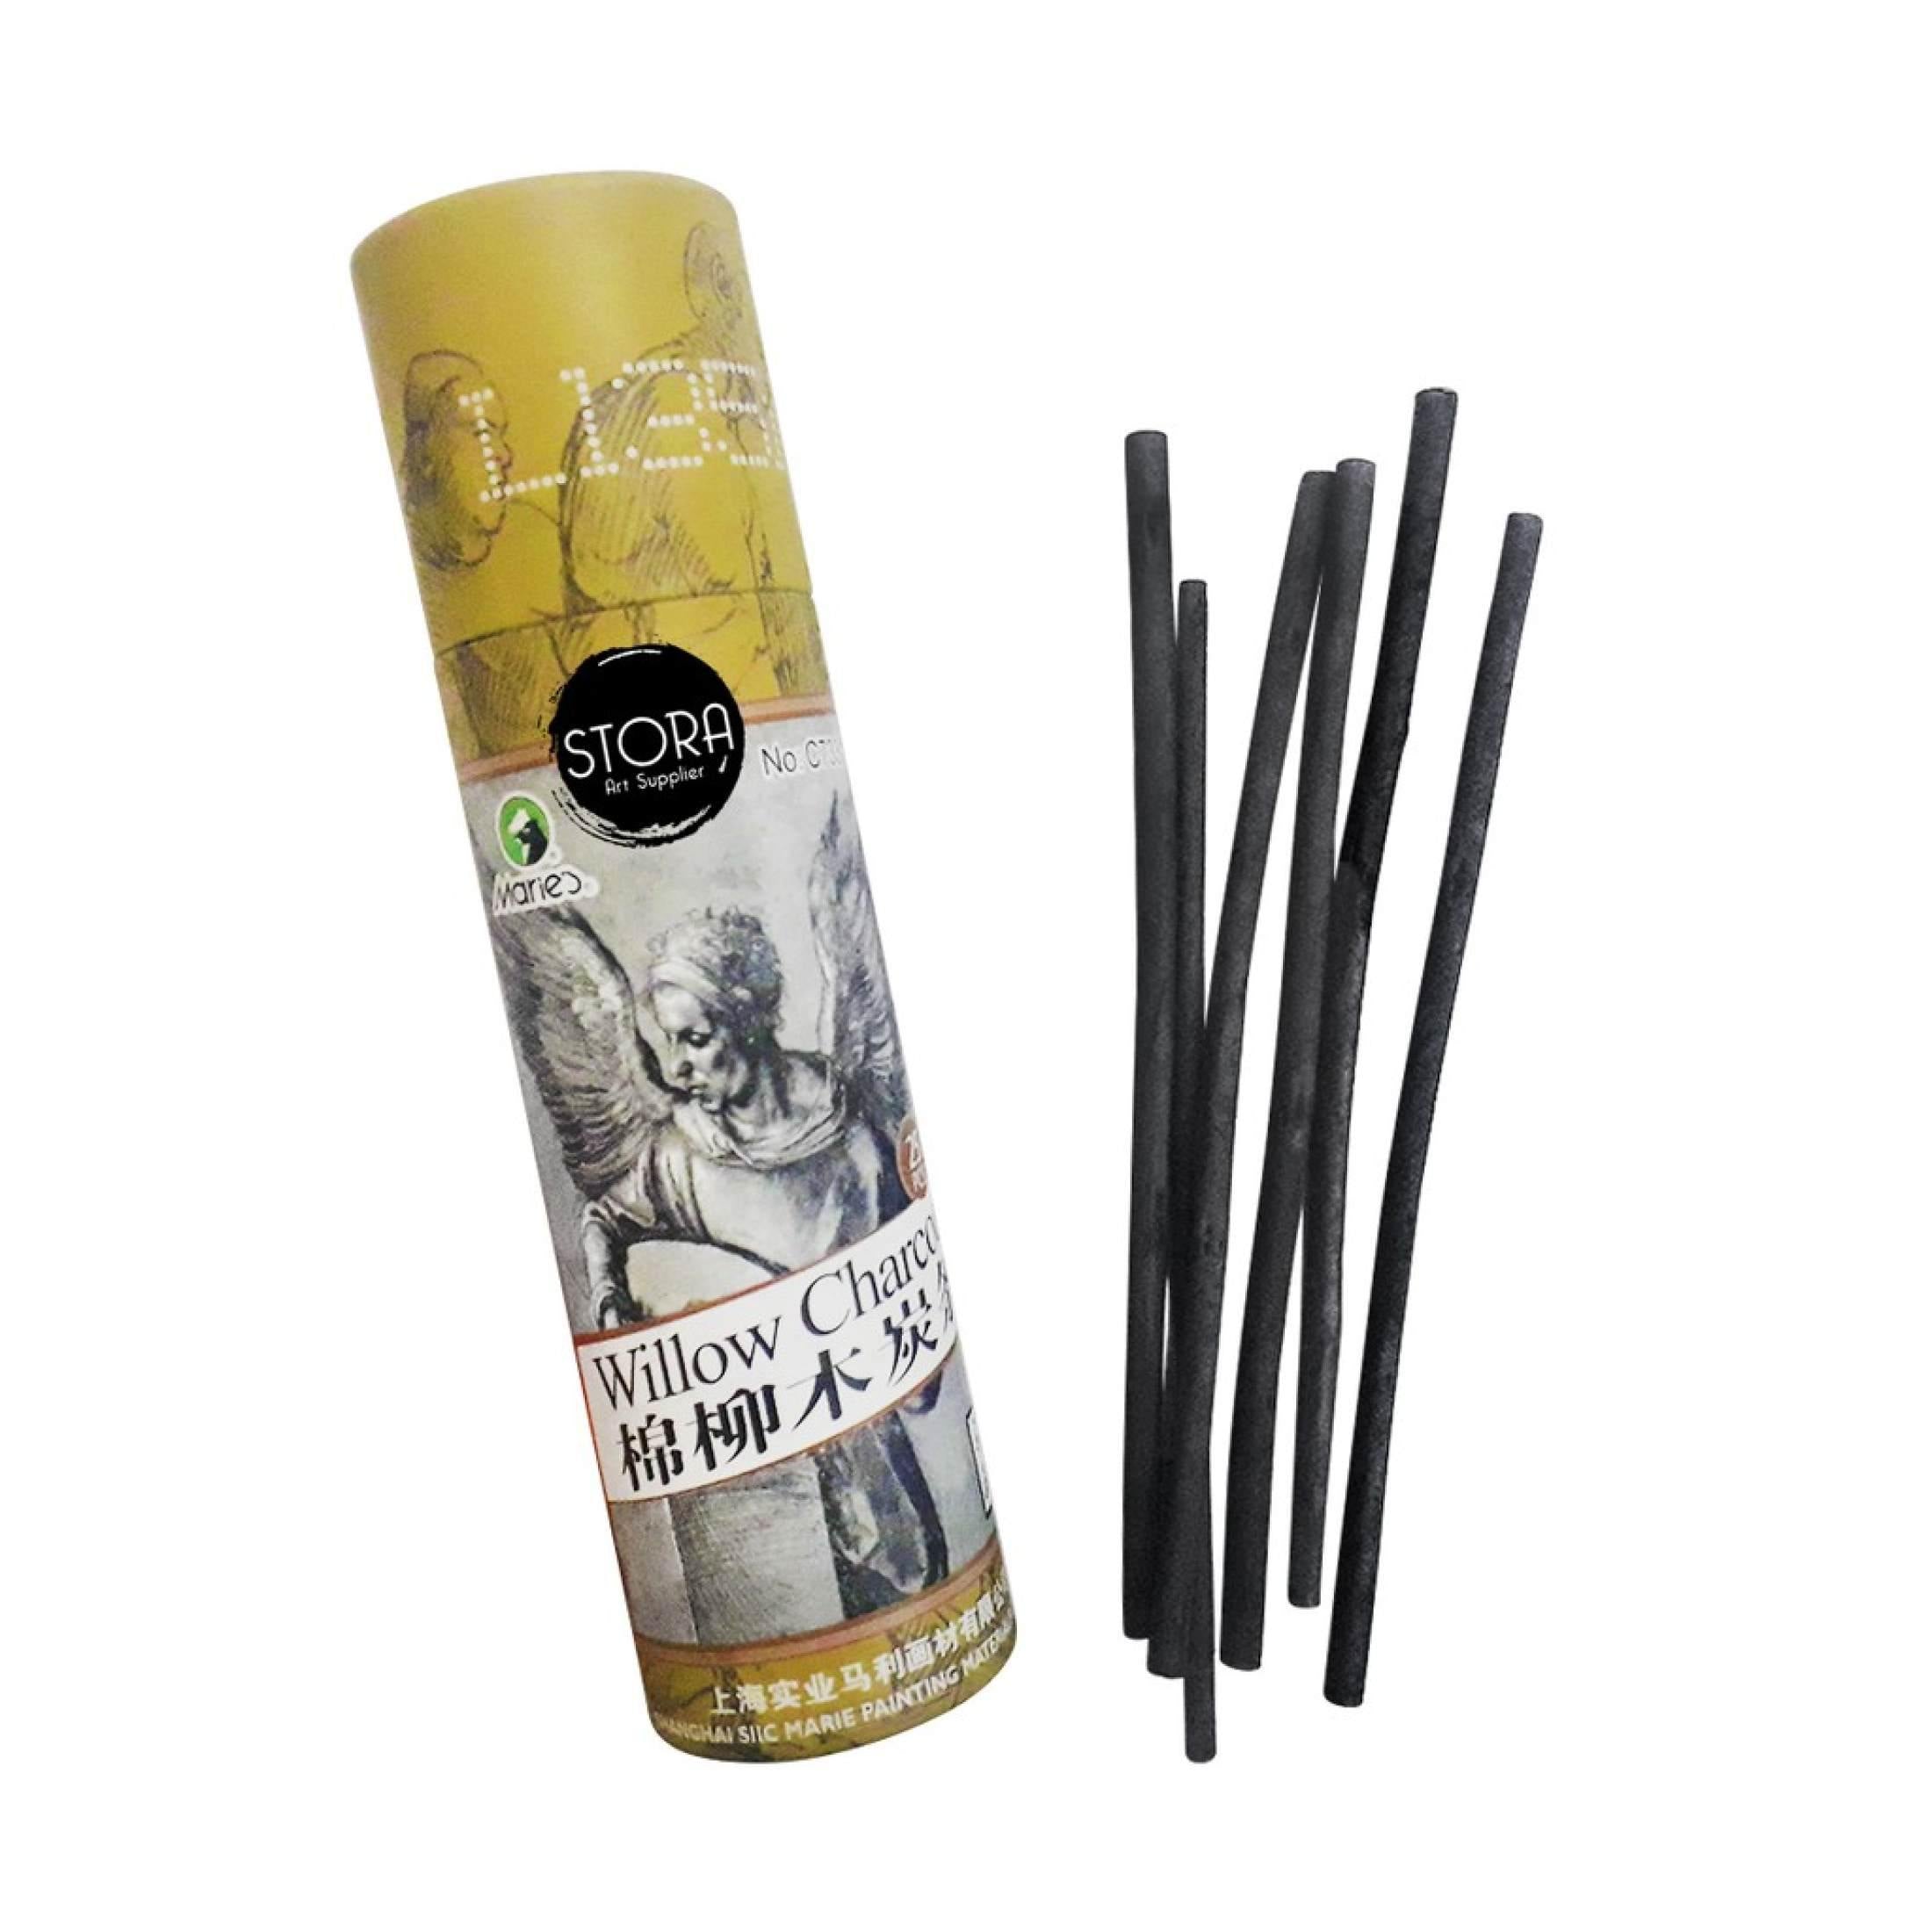 Marie's Willow Charcoal Sticks, Pack Of 25